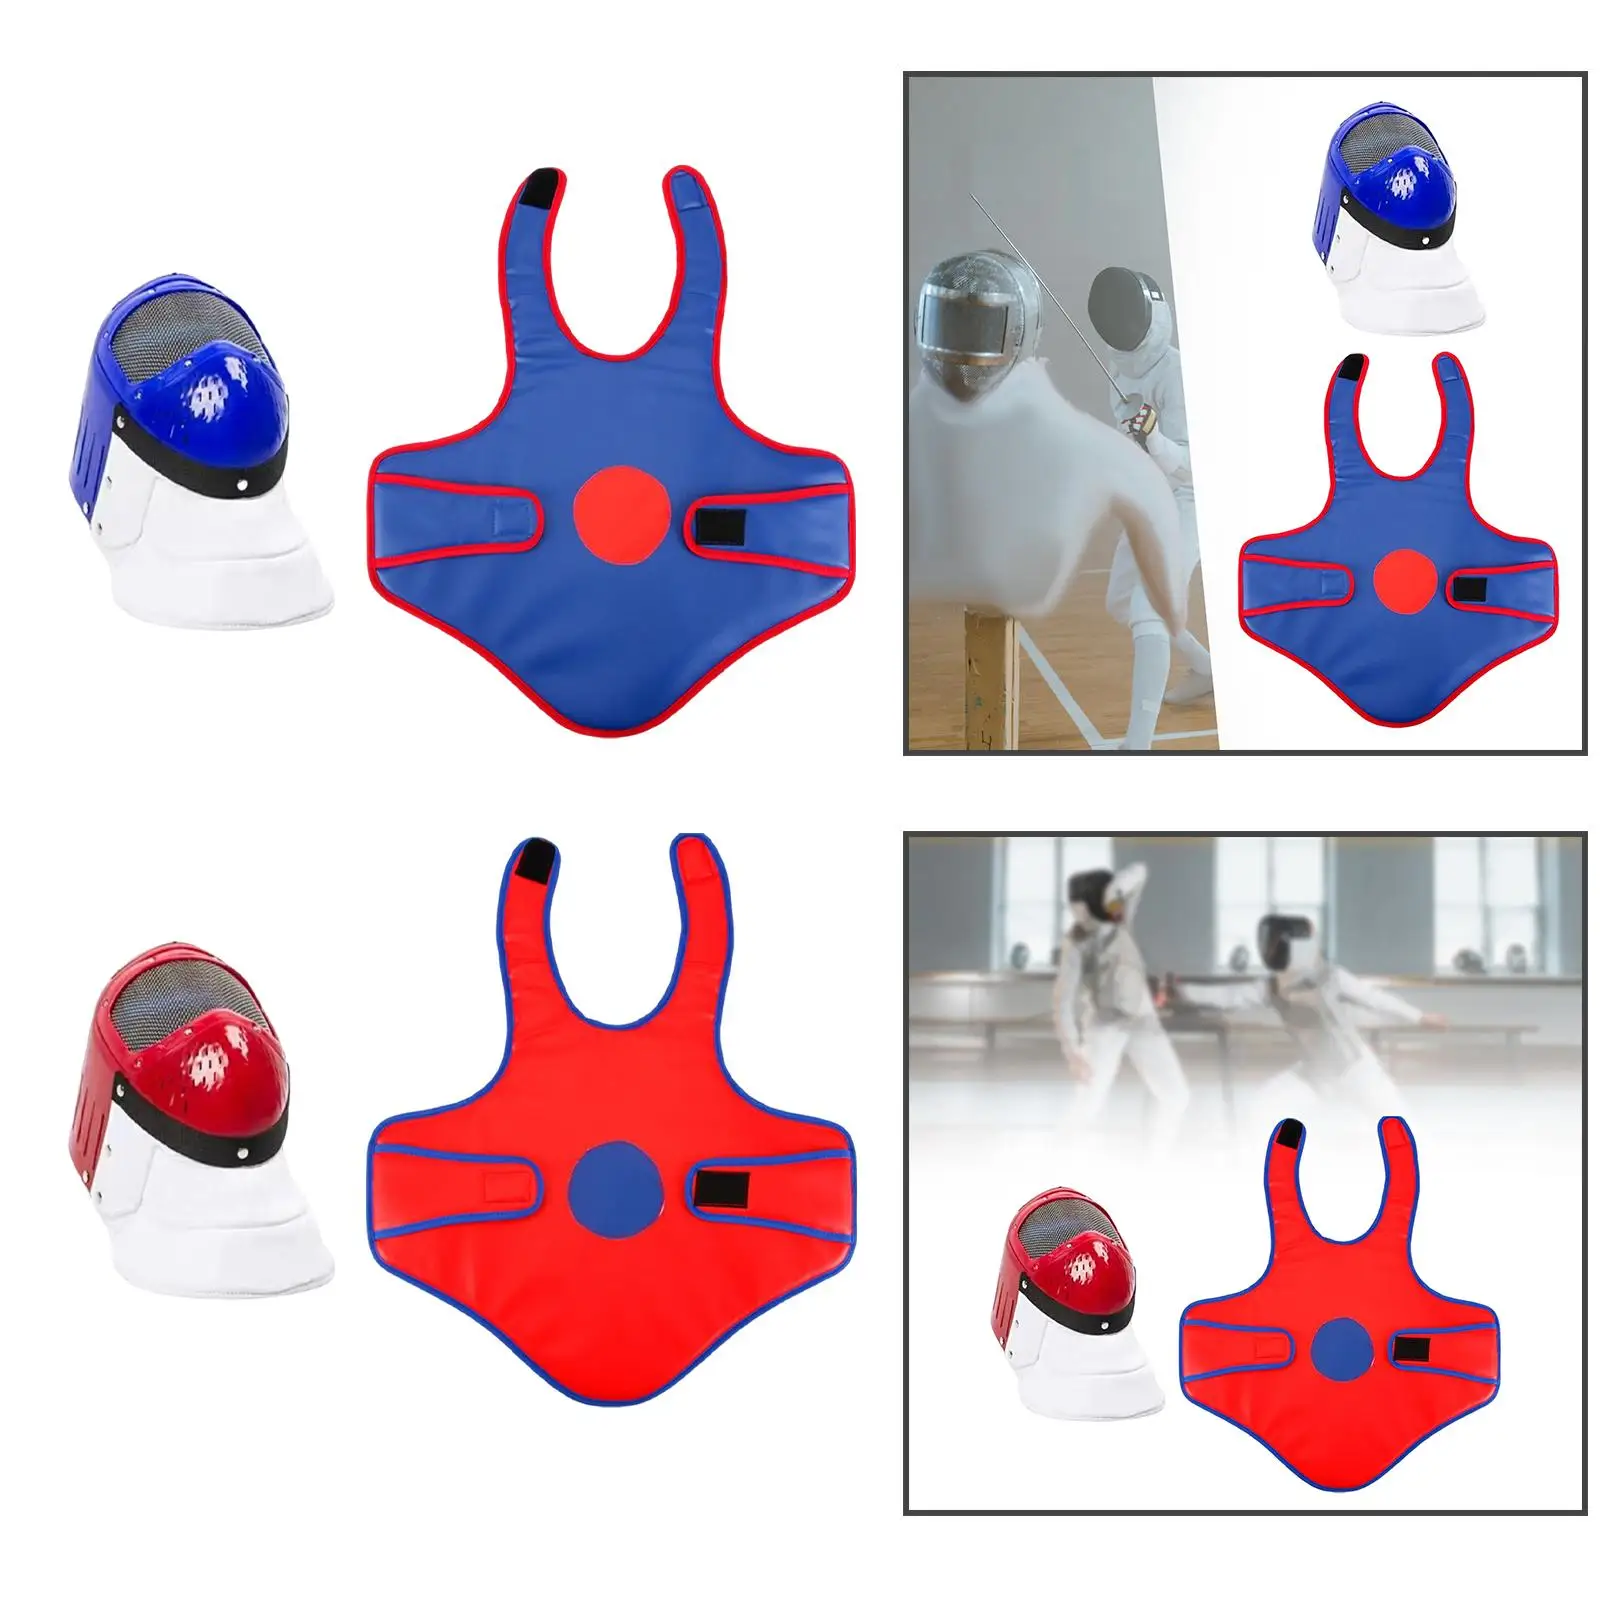 Fencing Sports Mask Practicing Face Mask Fencing Protective Gear for Children Equipment